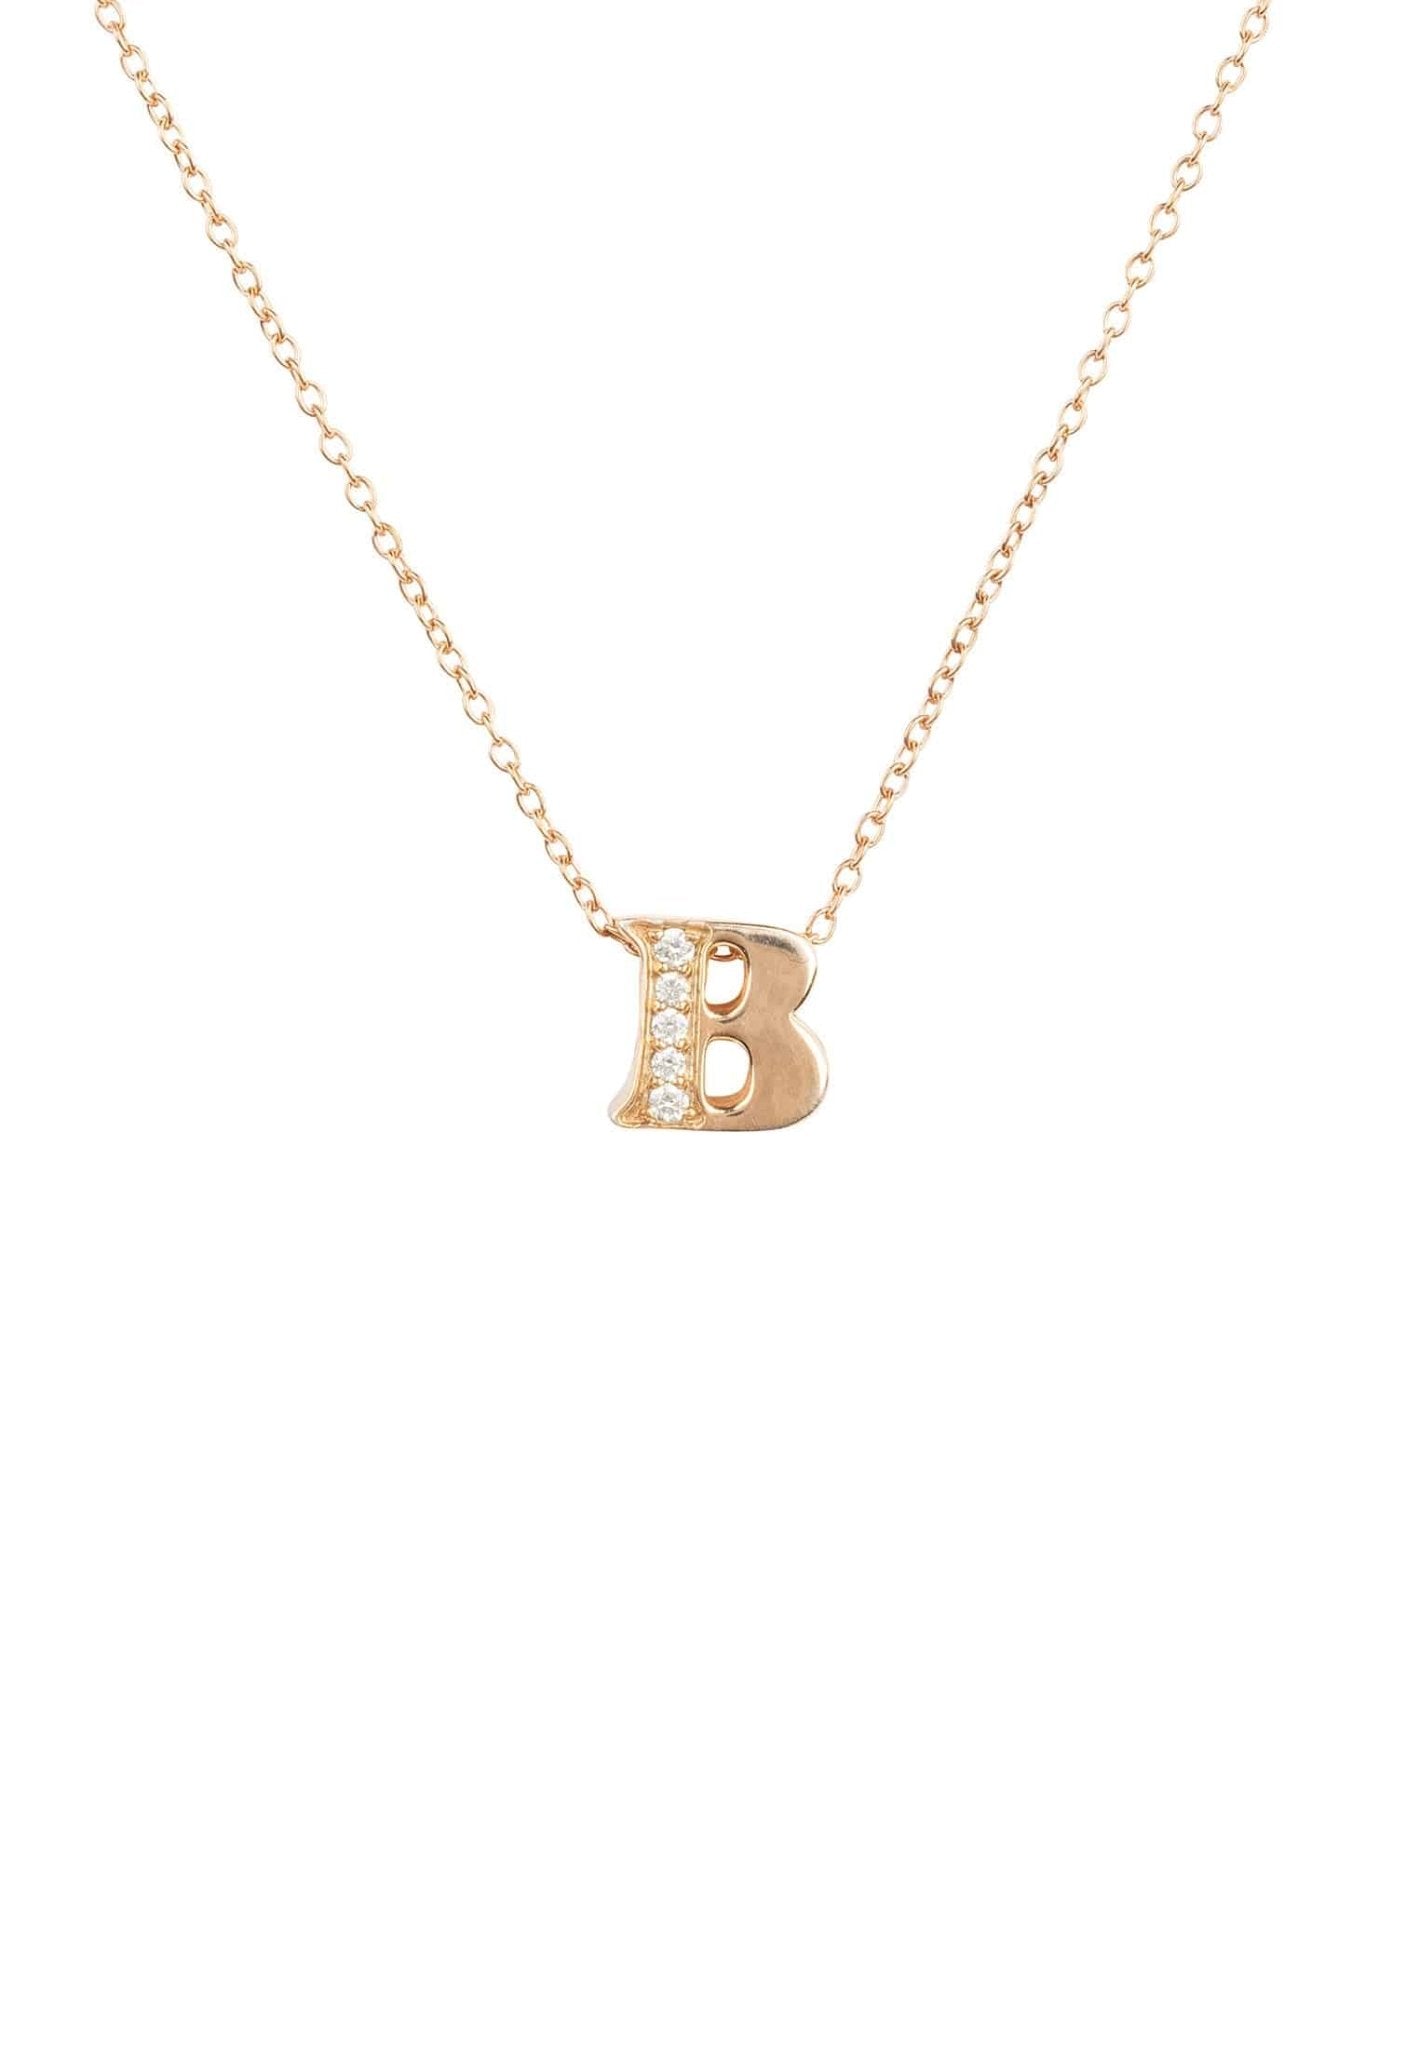 Reversible Round Initial Necklace By Pink Box in Rose Gold Tone - Orange -  Walmart.com